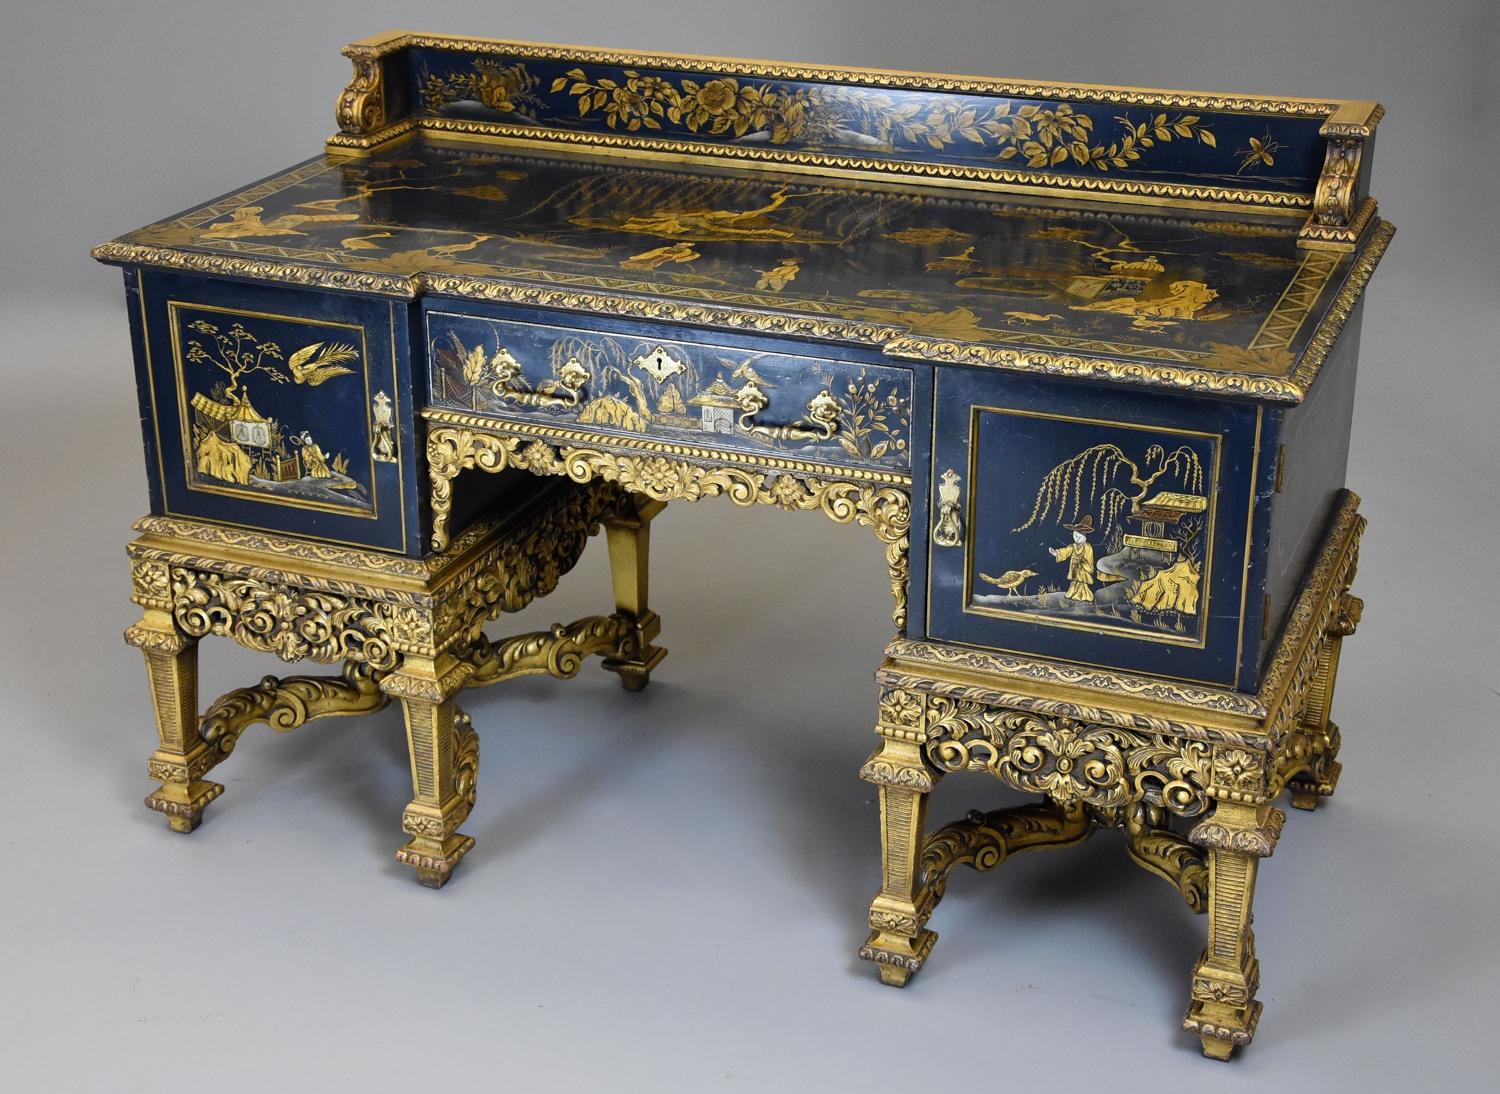 Superb highly decorative Charles II style Chinoiserie dressing table